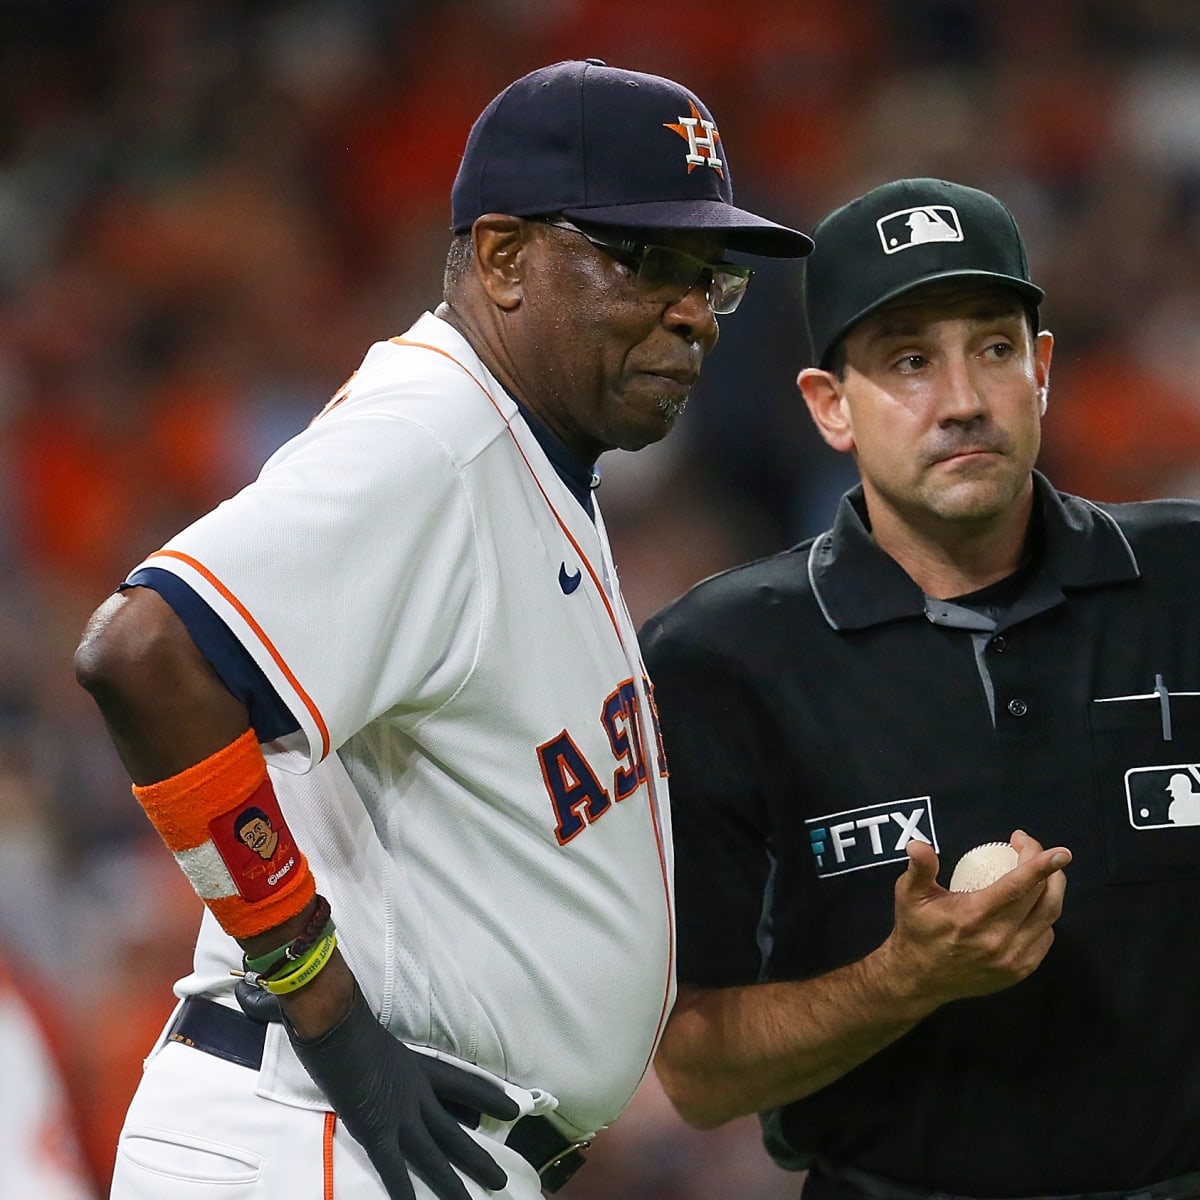 The road is rough — but these wannabe Major League Baseball umpires are  keeping their eyes on the ball